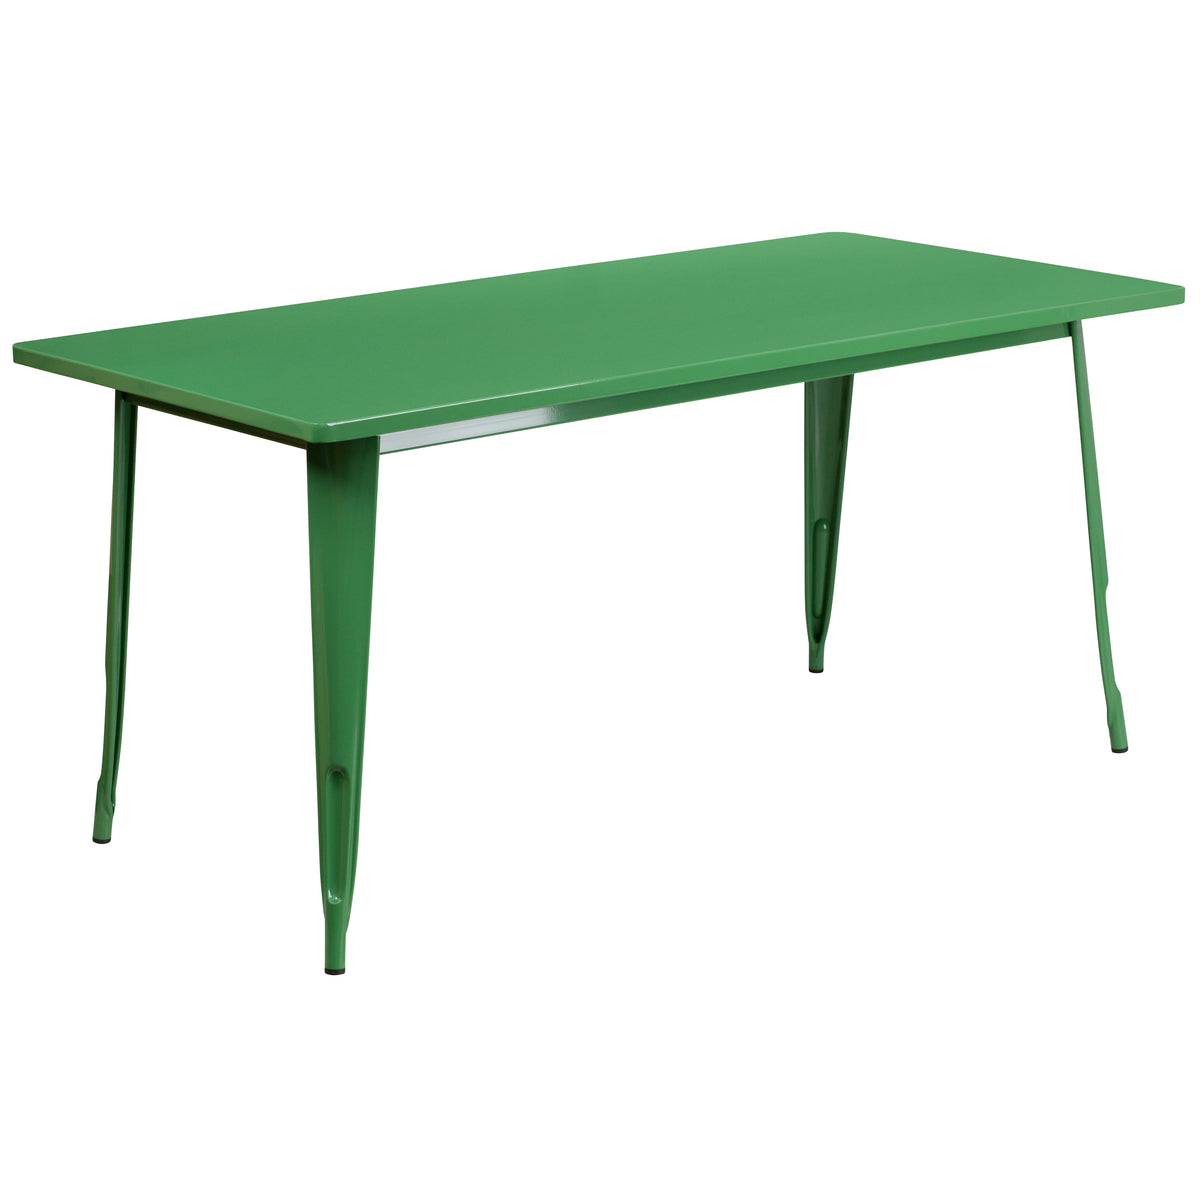 Green |#| 31.5inch x 63inch Rectangular Green Metal Indoor-Outdoor Table Set with 6 Stack Chairs